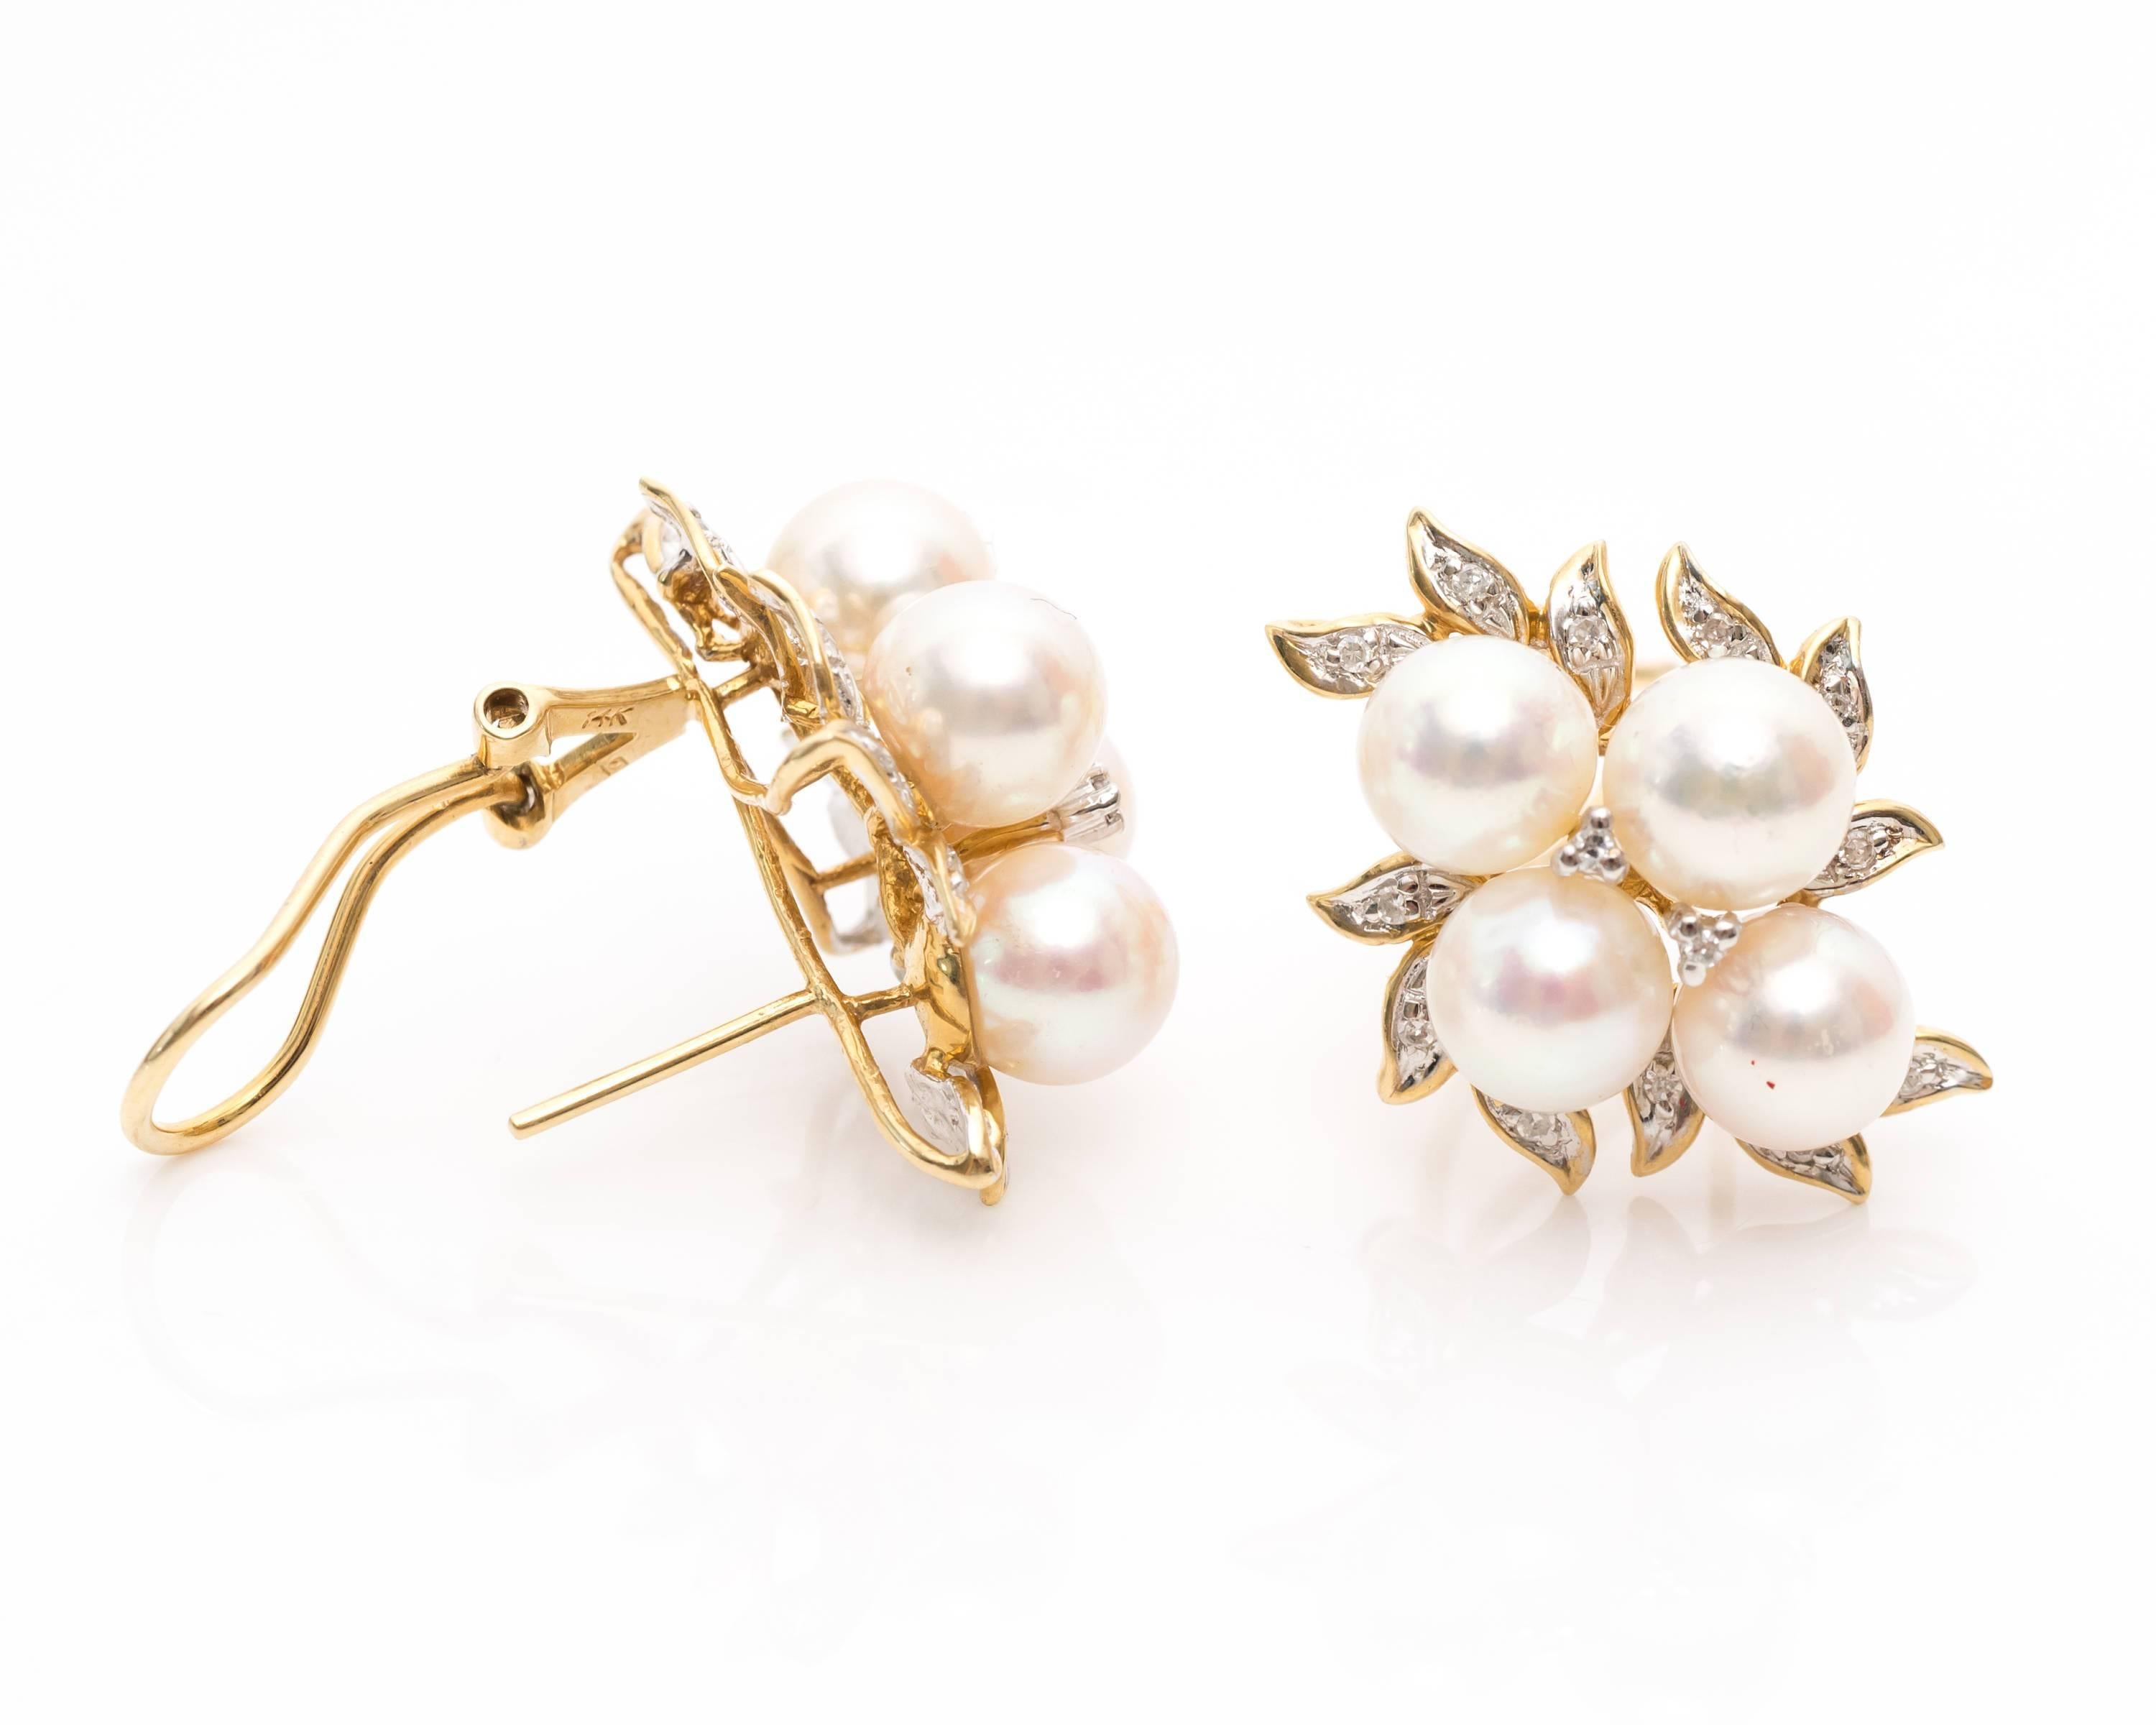 1980s Pearl & Diamond Two Tone Earrings - 18 Karat Gold, 14 Karat Yellow and White Gold, Cultured Pearls, Diamonds

Each earring features 4 large cultured pearls. The pearls have a lovely pink sheen and slightly blistered surfaces similar to blister